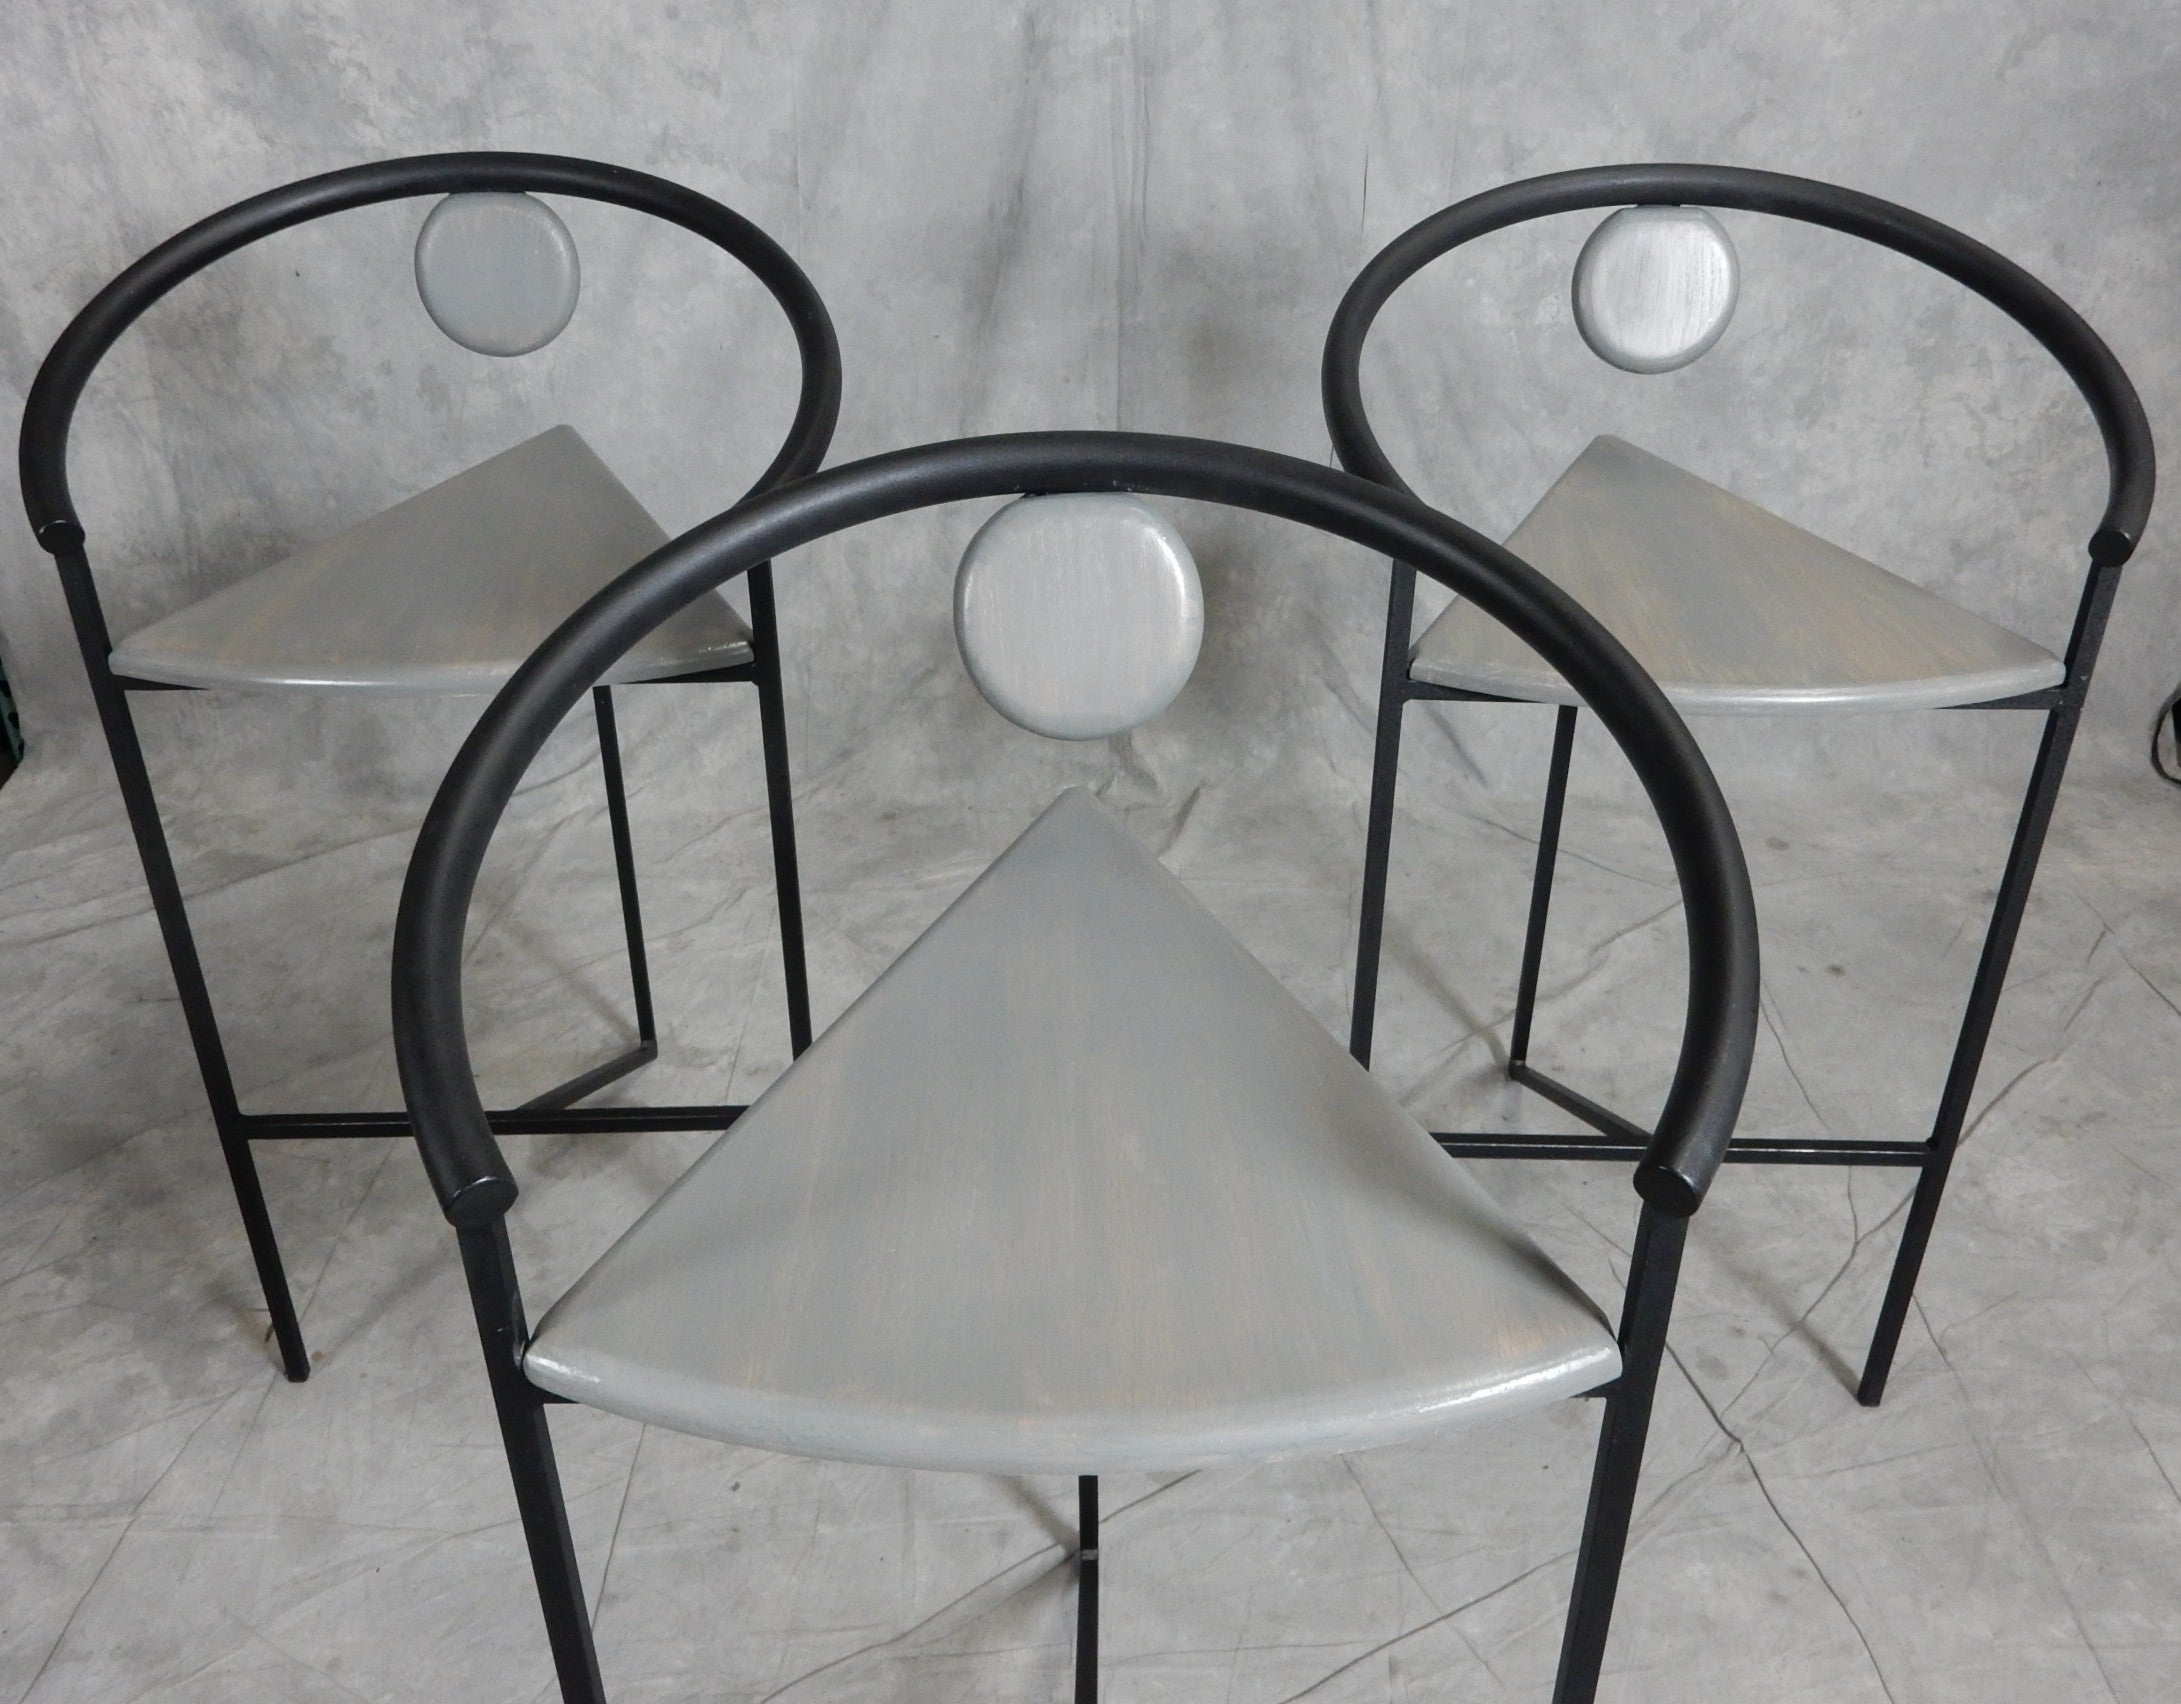 Set of 3 Post-Modern era bar stools styled after Michele de Lucchi 